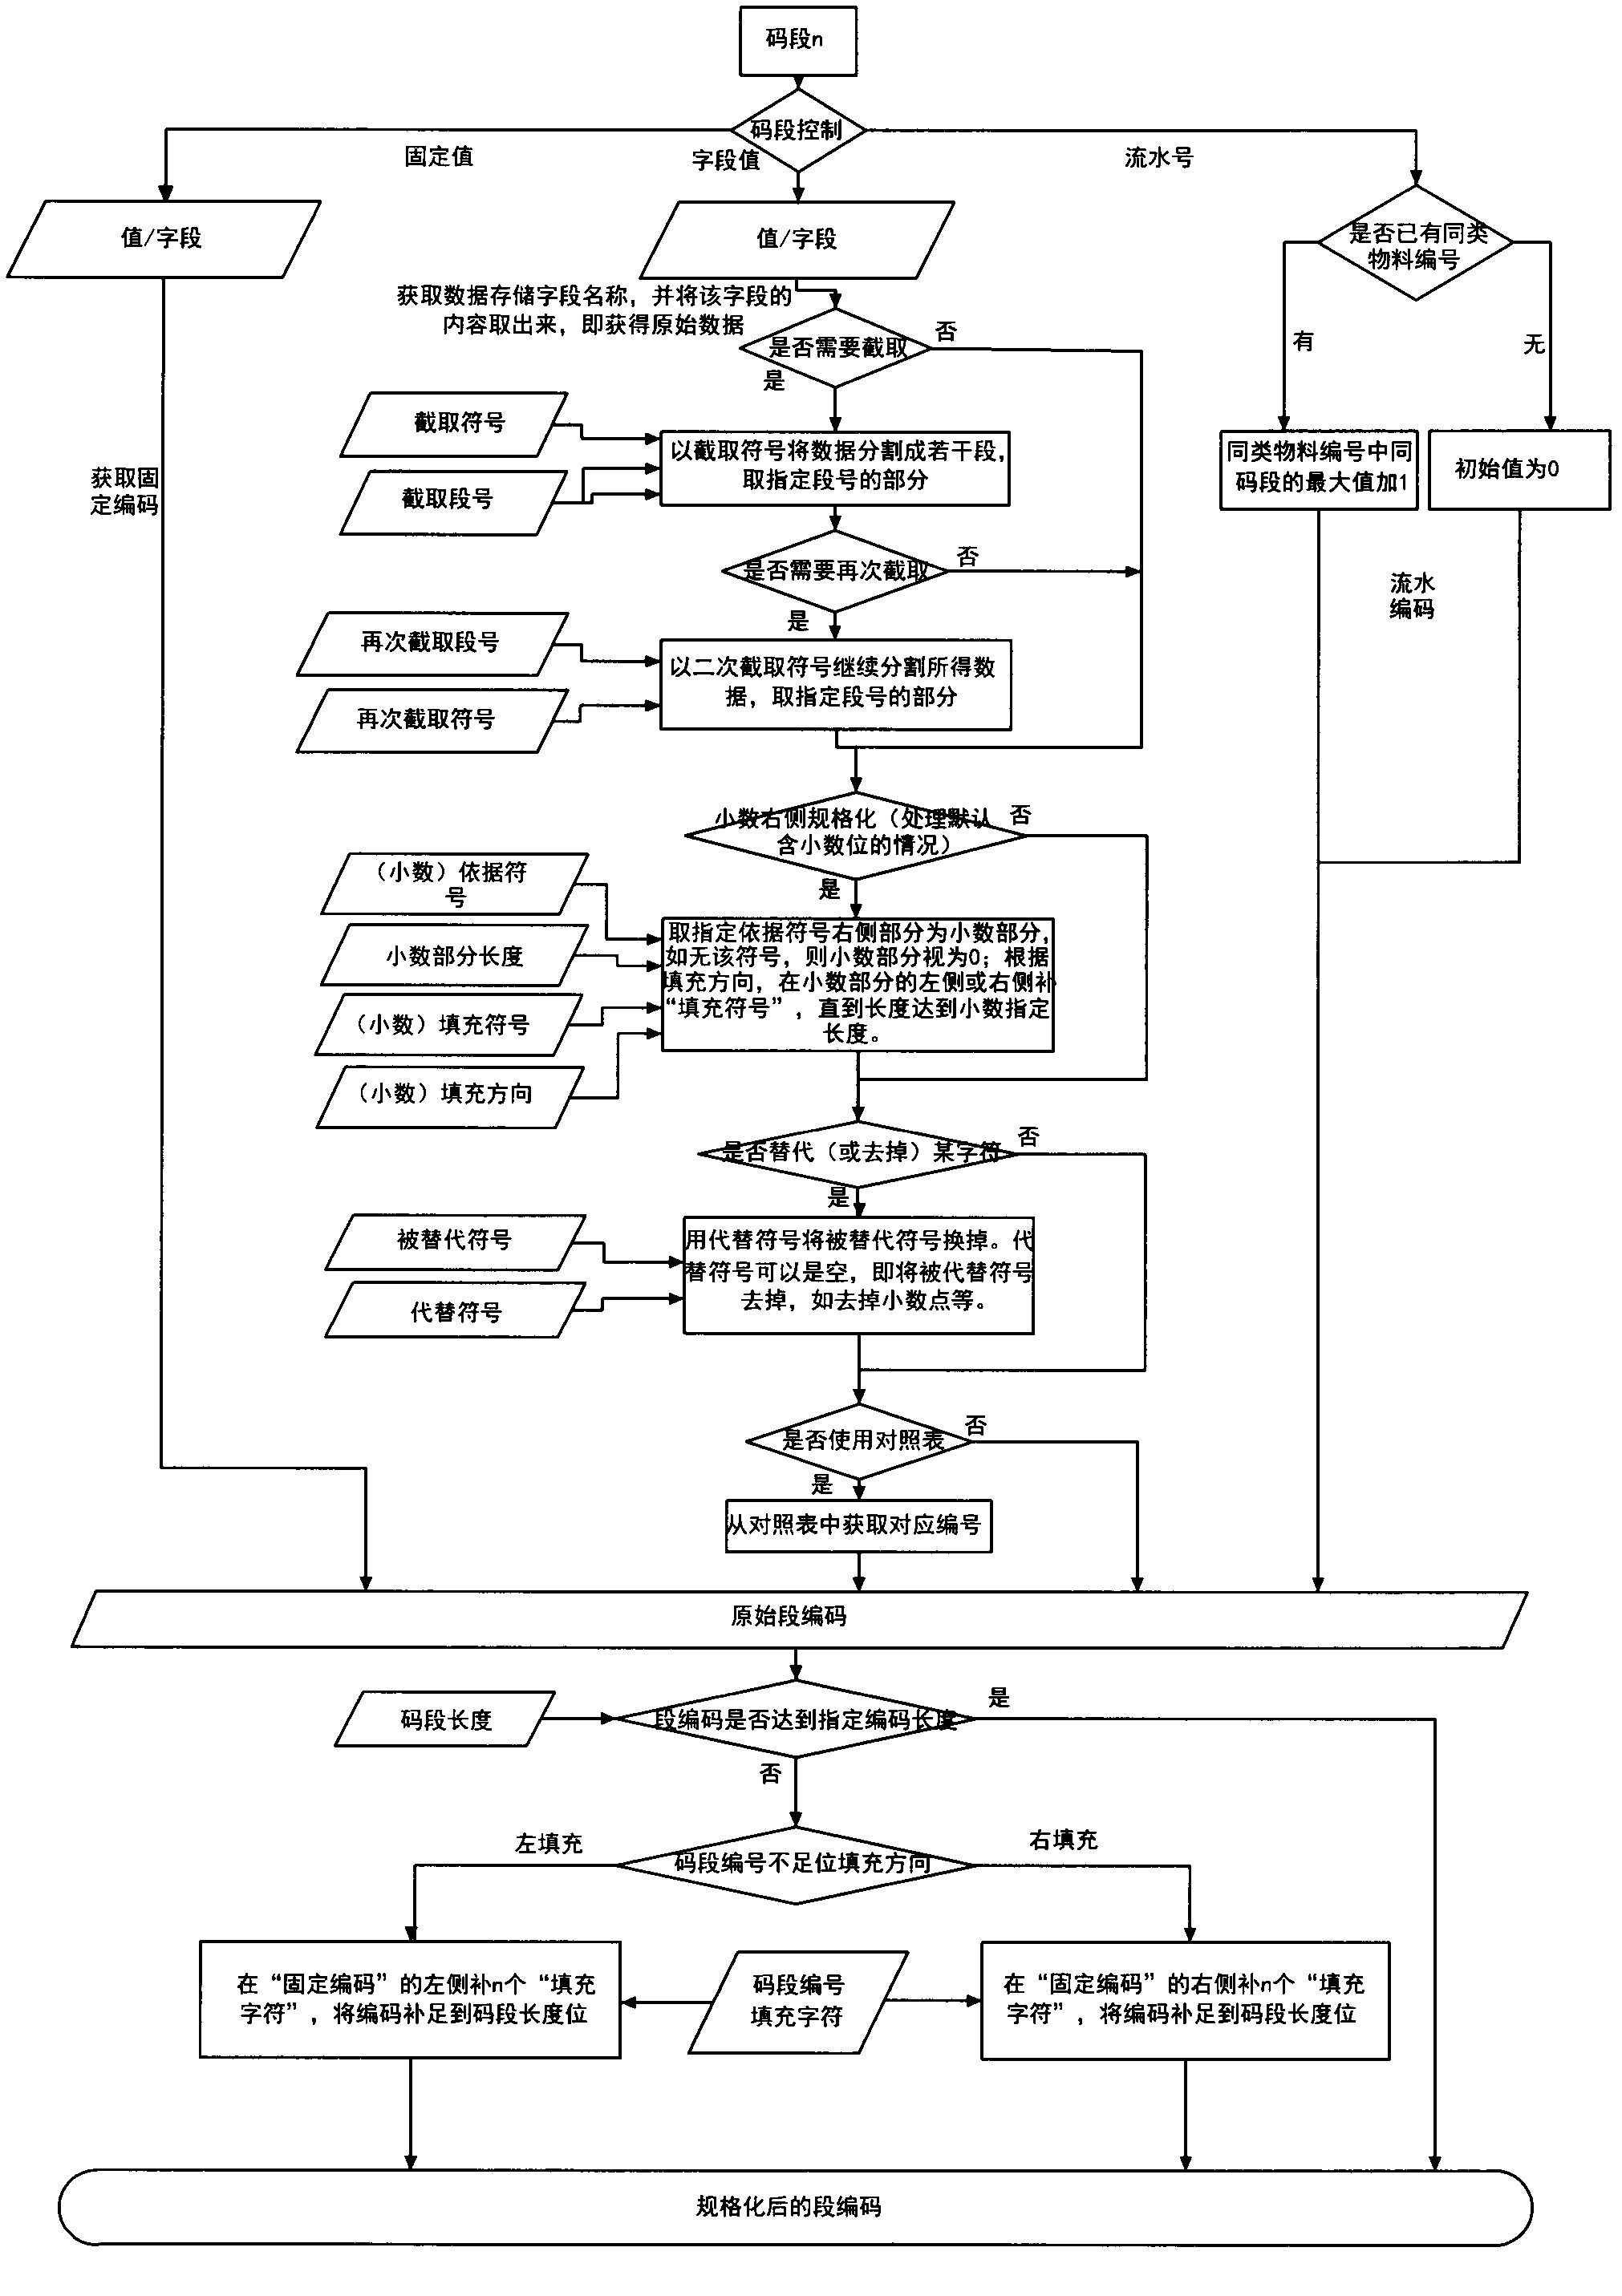 General material coding method capable of coding according to user-defined rule